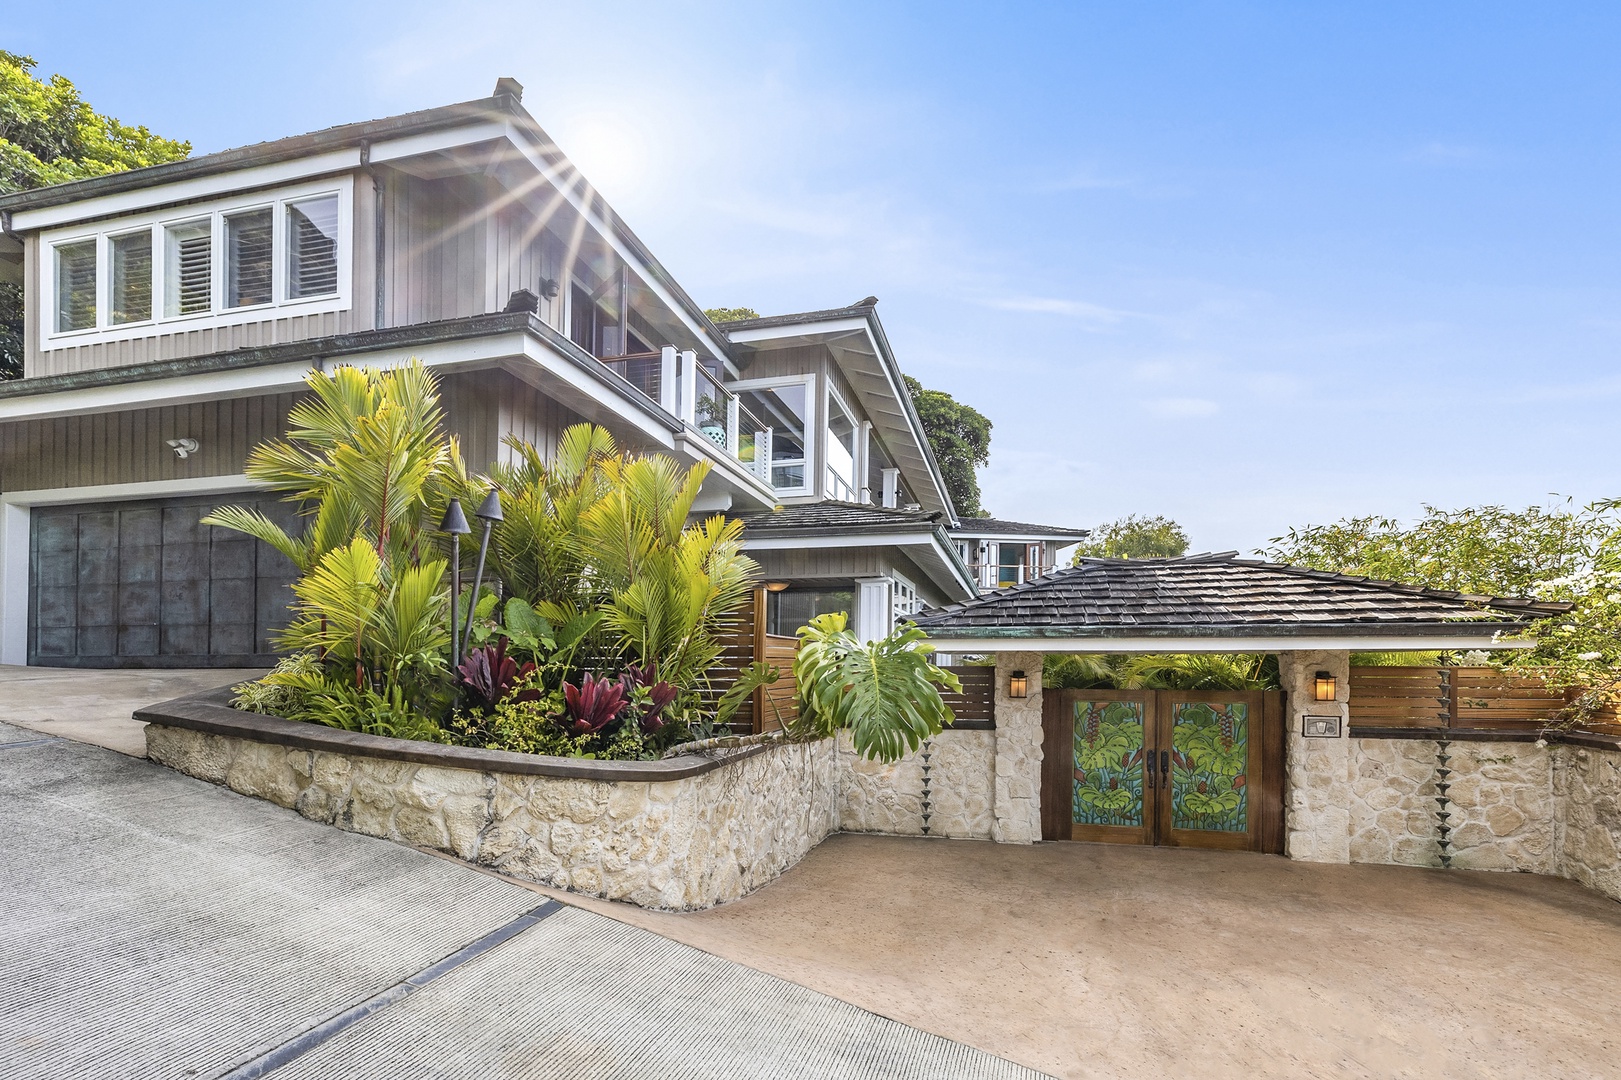 Kailua Vacation Rentals, Lanikai Villa* - Arrive at your villa and use the private entrance to start your vacation of a lifetime!